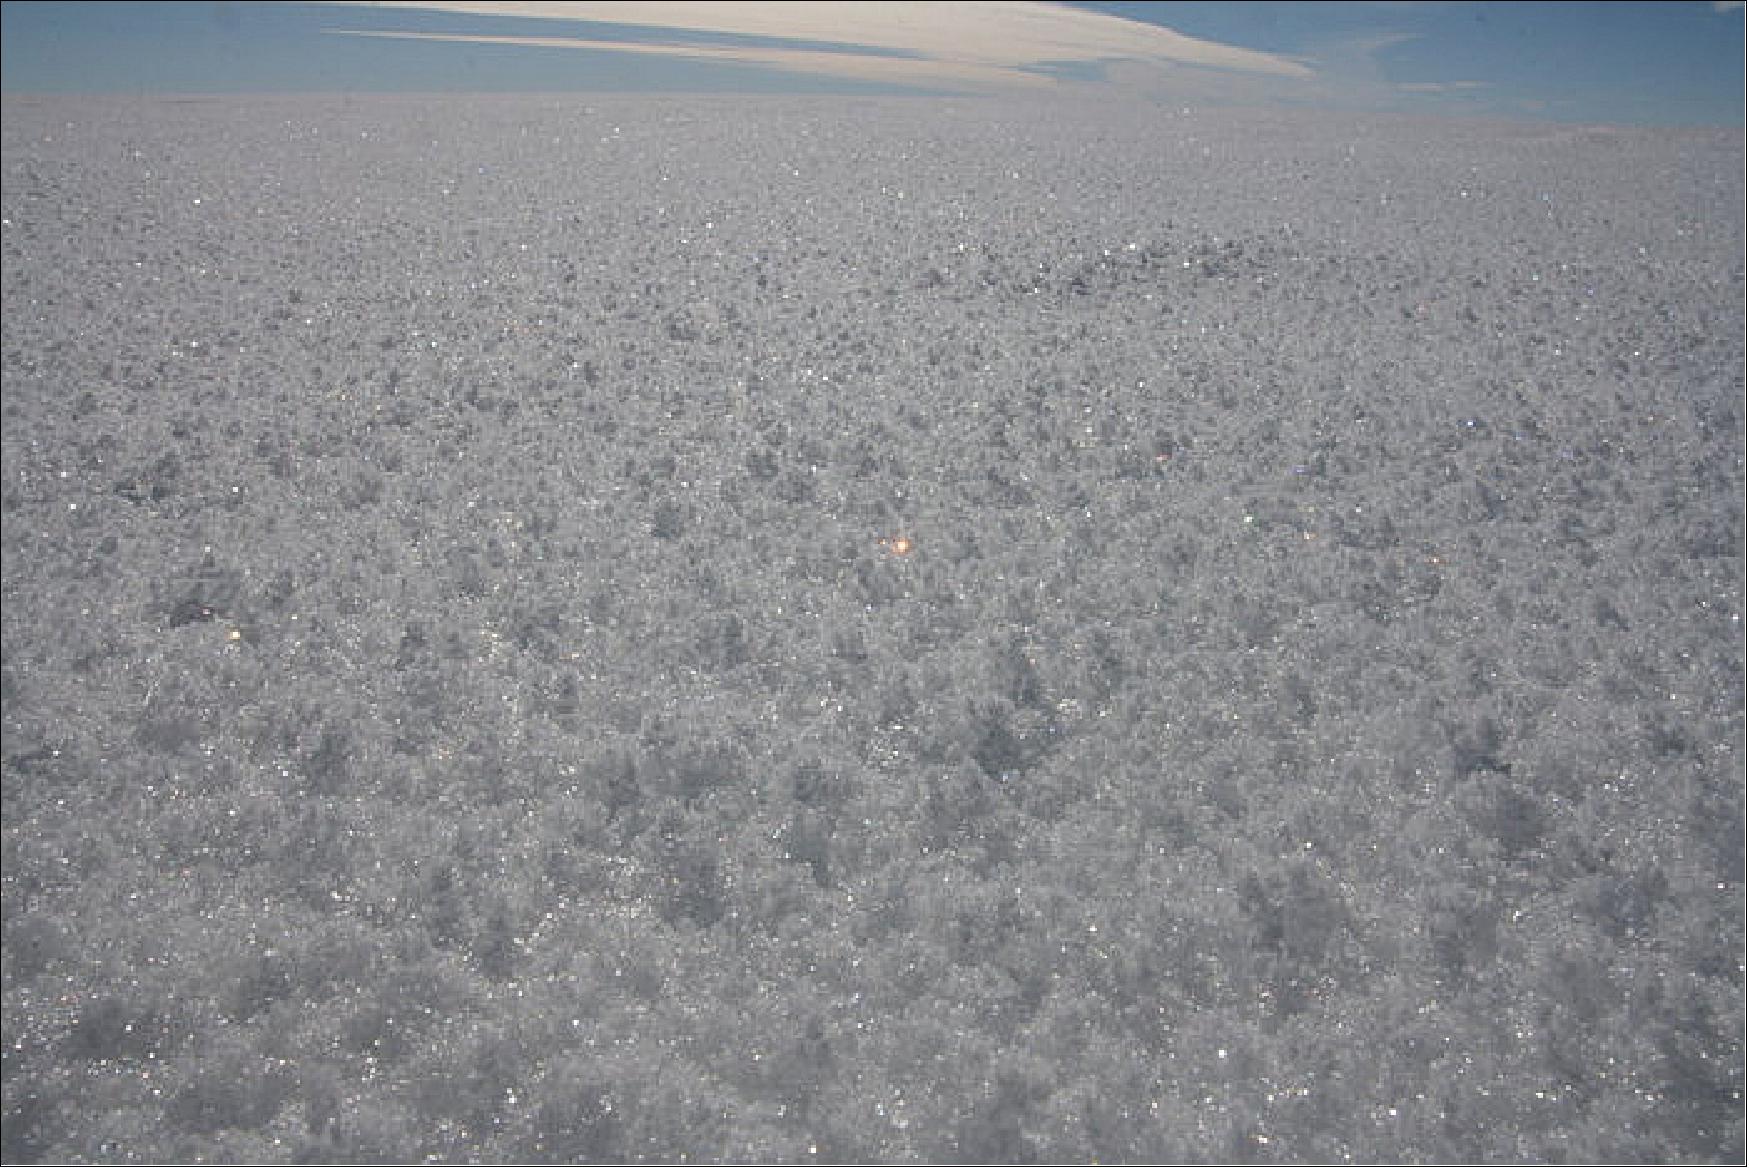 Figure 16: Grainy nature of snow. Most of us probably wouldn’t think of describing snow in terms of its grain size. However, grain size is fundamental to the amount of sunlight that snow reflects back into space, its albedo (image credit: H. C. Steen Larsen)